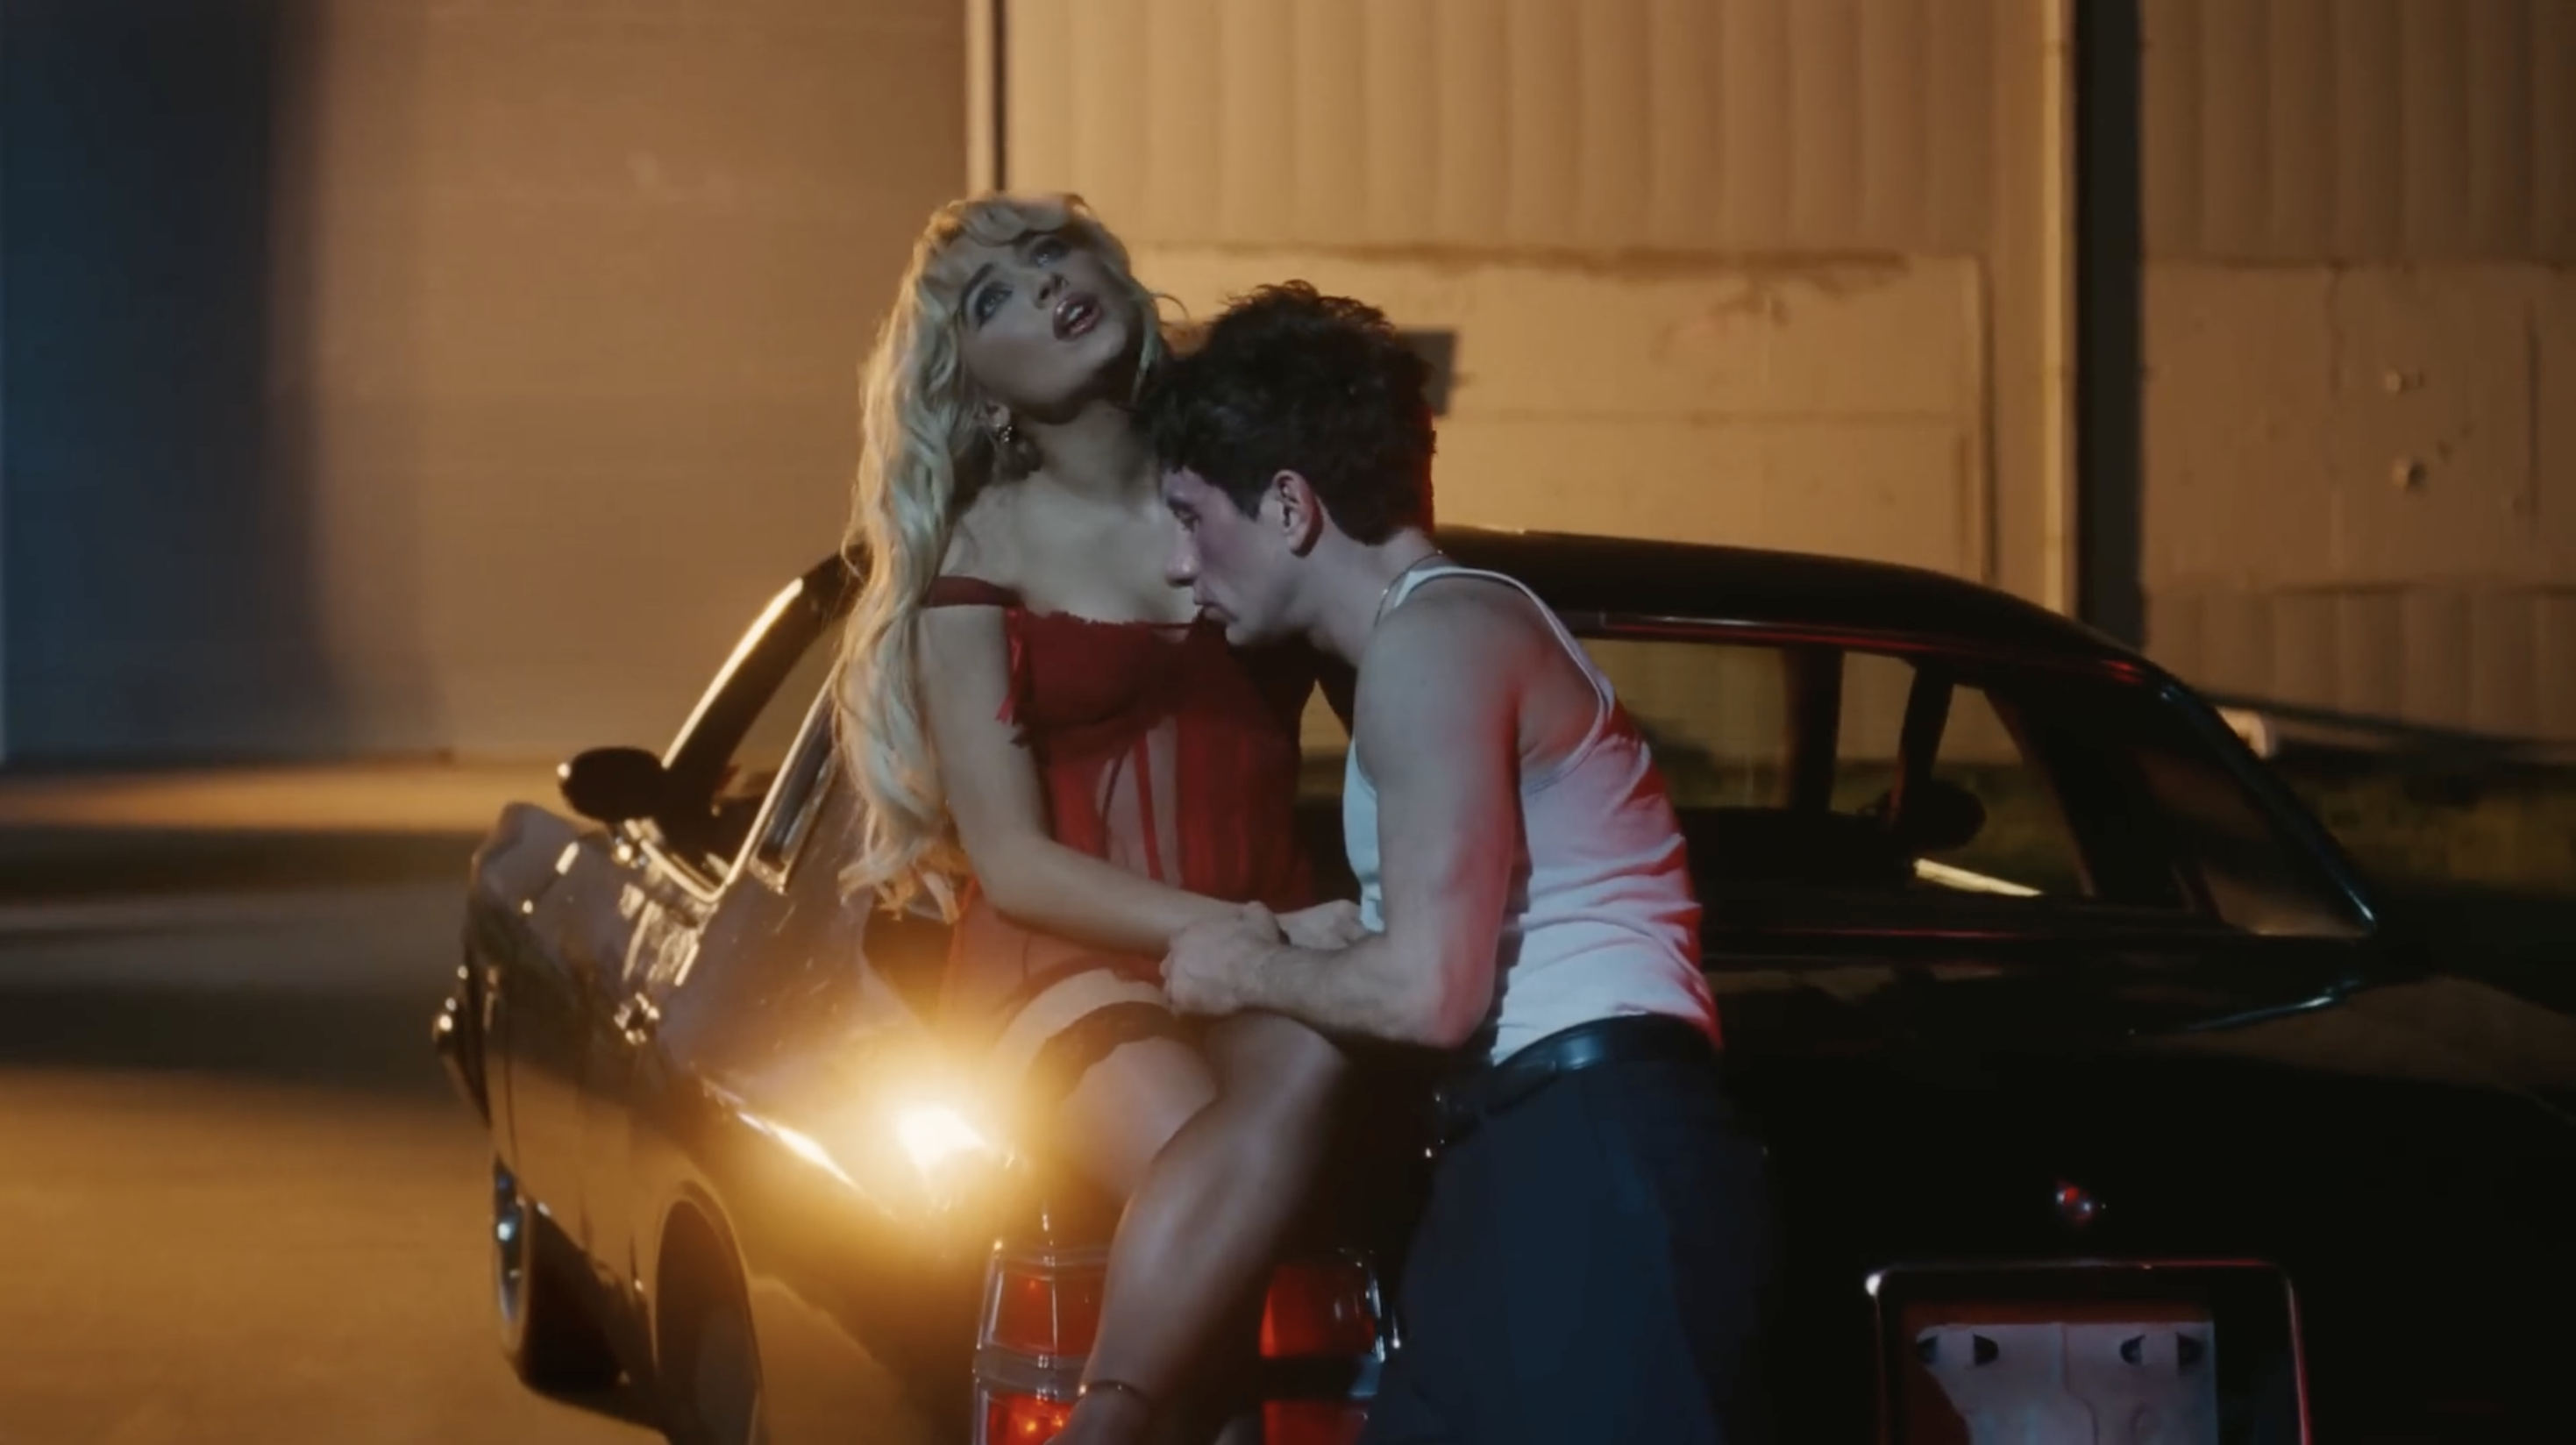 Sabrina sitting on a car while Barry leans in close to her in a scene from the music video